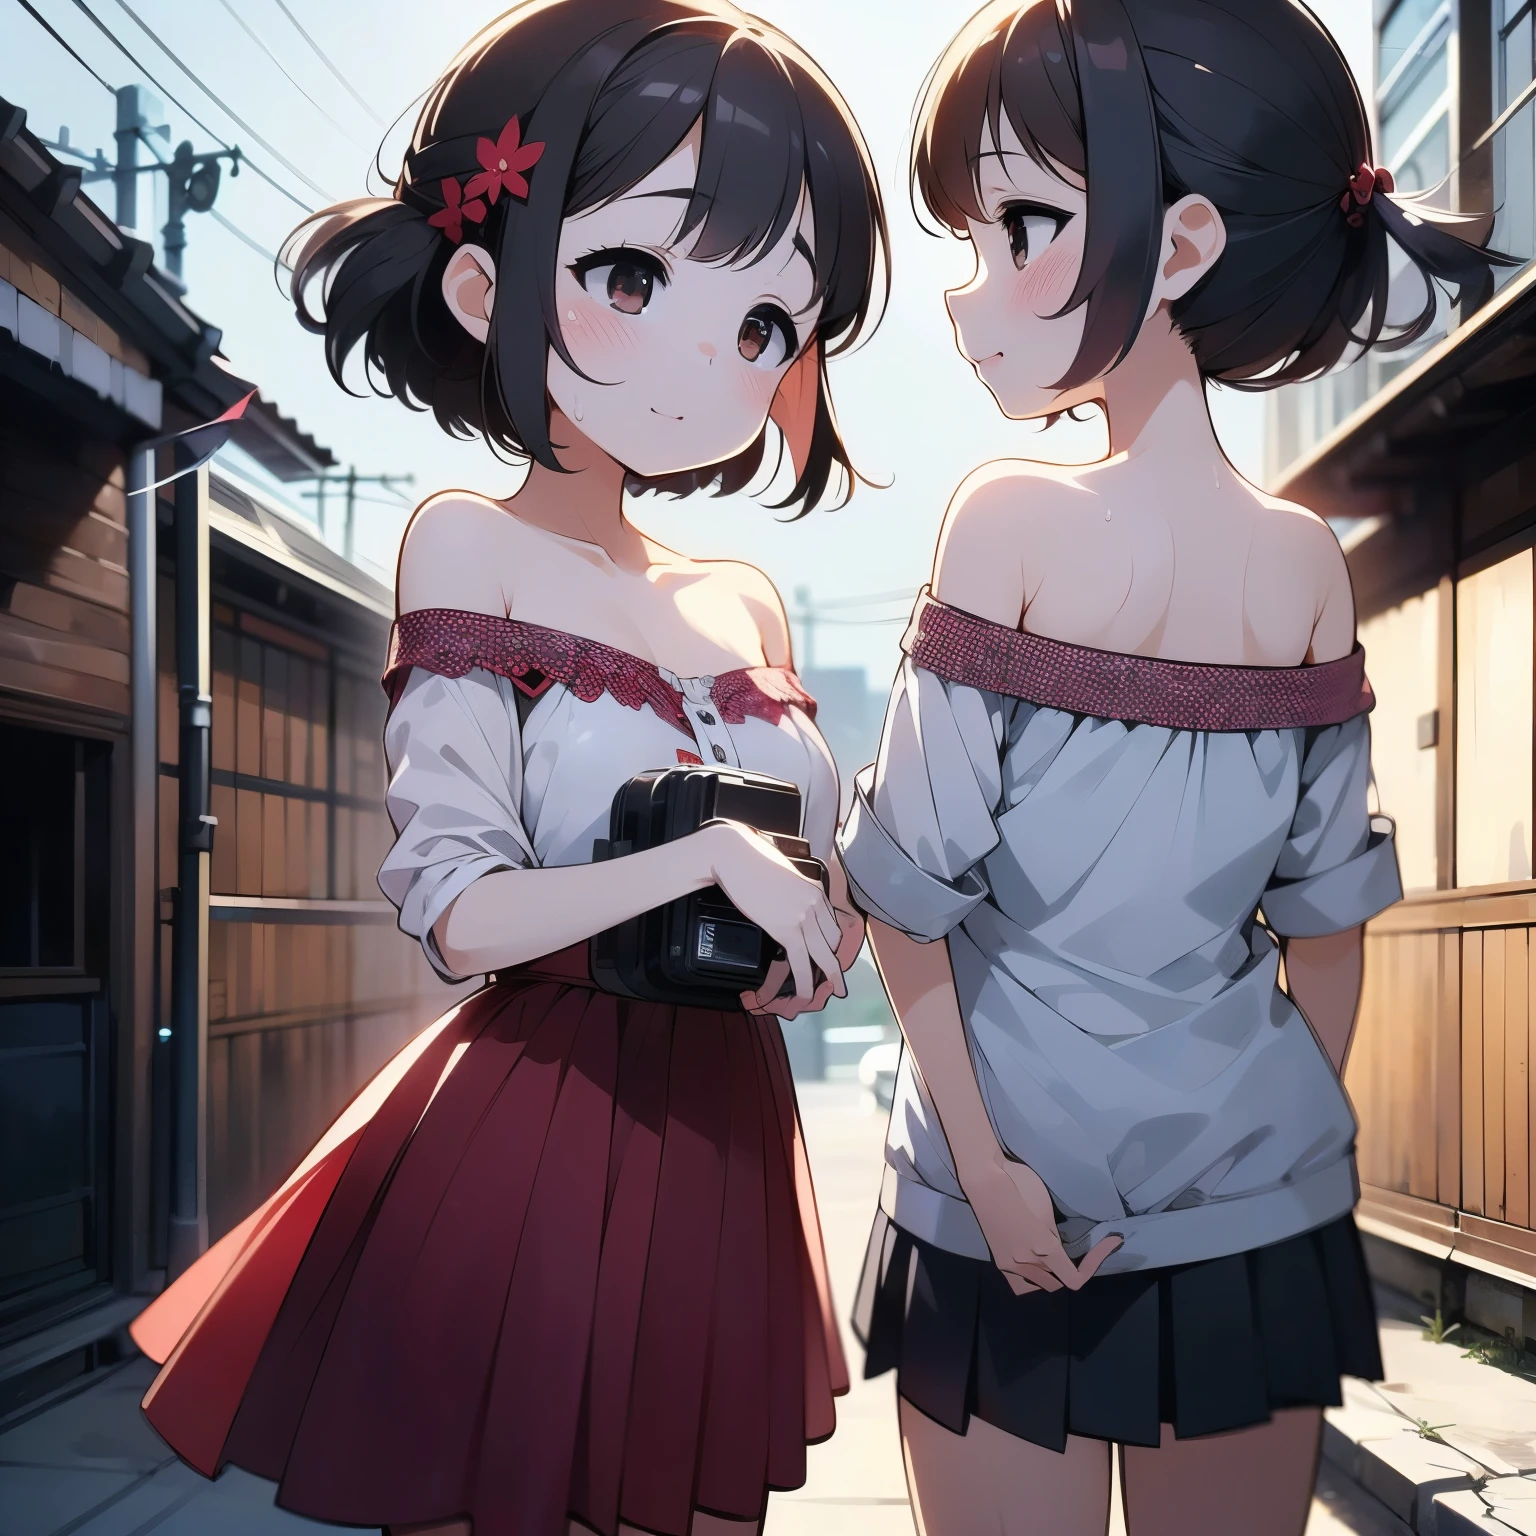 (Two Japanese girlasterpiece, 最high quality, high quality, High precision,Highly detailed 8K wallpaper、Innocent、、back alley、night、深night、Walking through a residential area at night、Walking home at night、(red shoulders、Flushed skin)、(Off-the-shoulder oversized solid shirt、no skirt、No underwear)、（Holding a school bag）、(Listening to music through headphones、Close ~ eyes)、(winter、Low air temperature)、white breath、(Moonlit Night Road、Electric light、blushing face)、Cute daughters、Cute kids、(Chest opening、Sweat running down my chest)、Mojimoji、(embarrassing smile)、defenseless、Cute squid belly、Innocence、cute face、being somewhat excited、cat、thin chest、Tsurupeta、cute face、No modification、thin、Before menarche、（girl、Little daughter、delicate、Feather hair ornament、brown hair、gray hair、slimming、beautiful belly、Cute surprised face）、（girl、wife、daughter、younger sister、Jiu）、Camera from a distance、